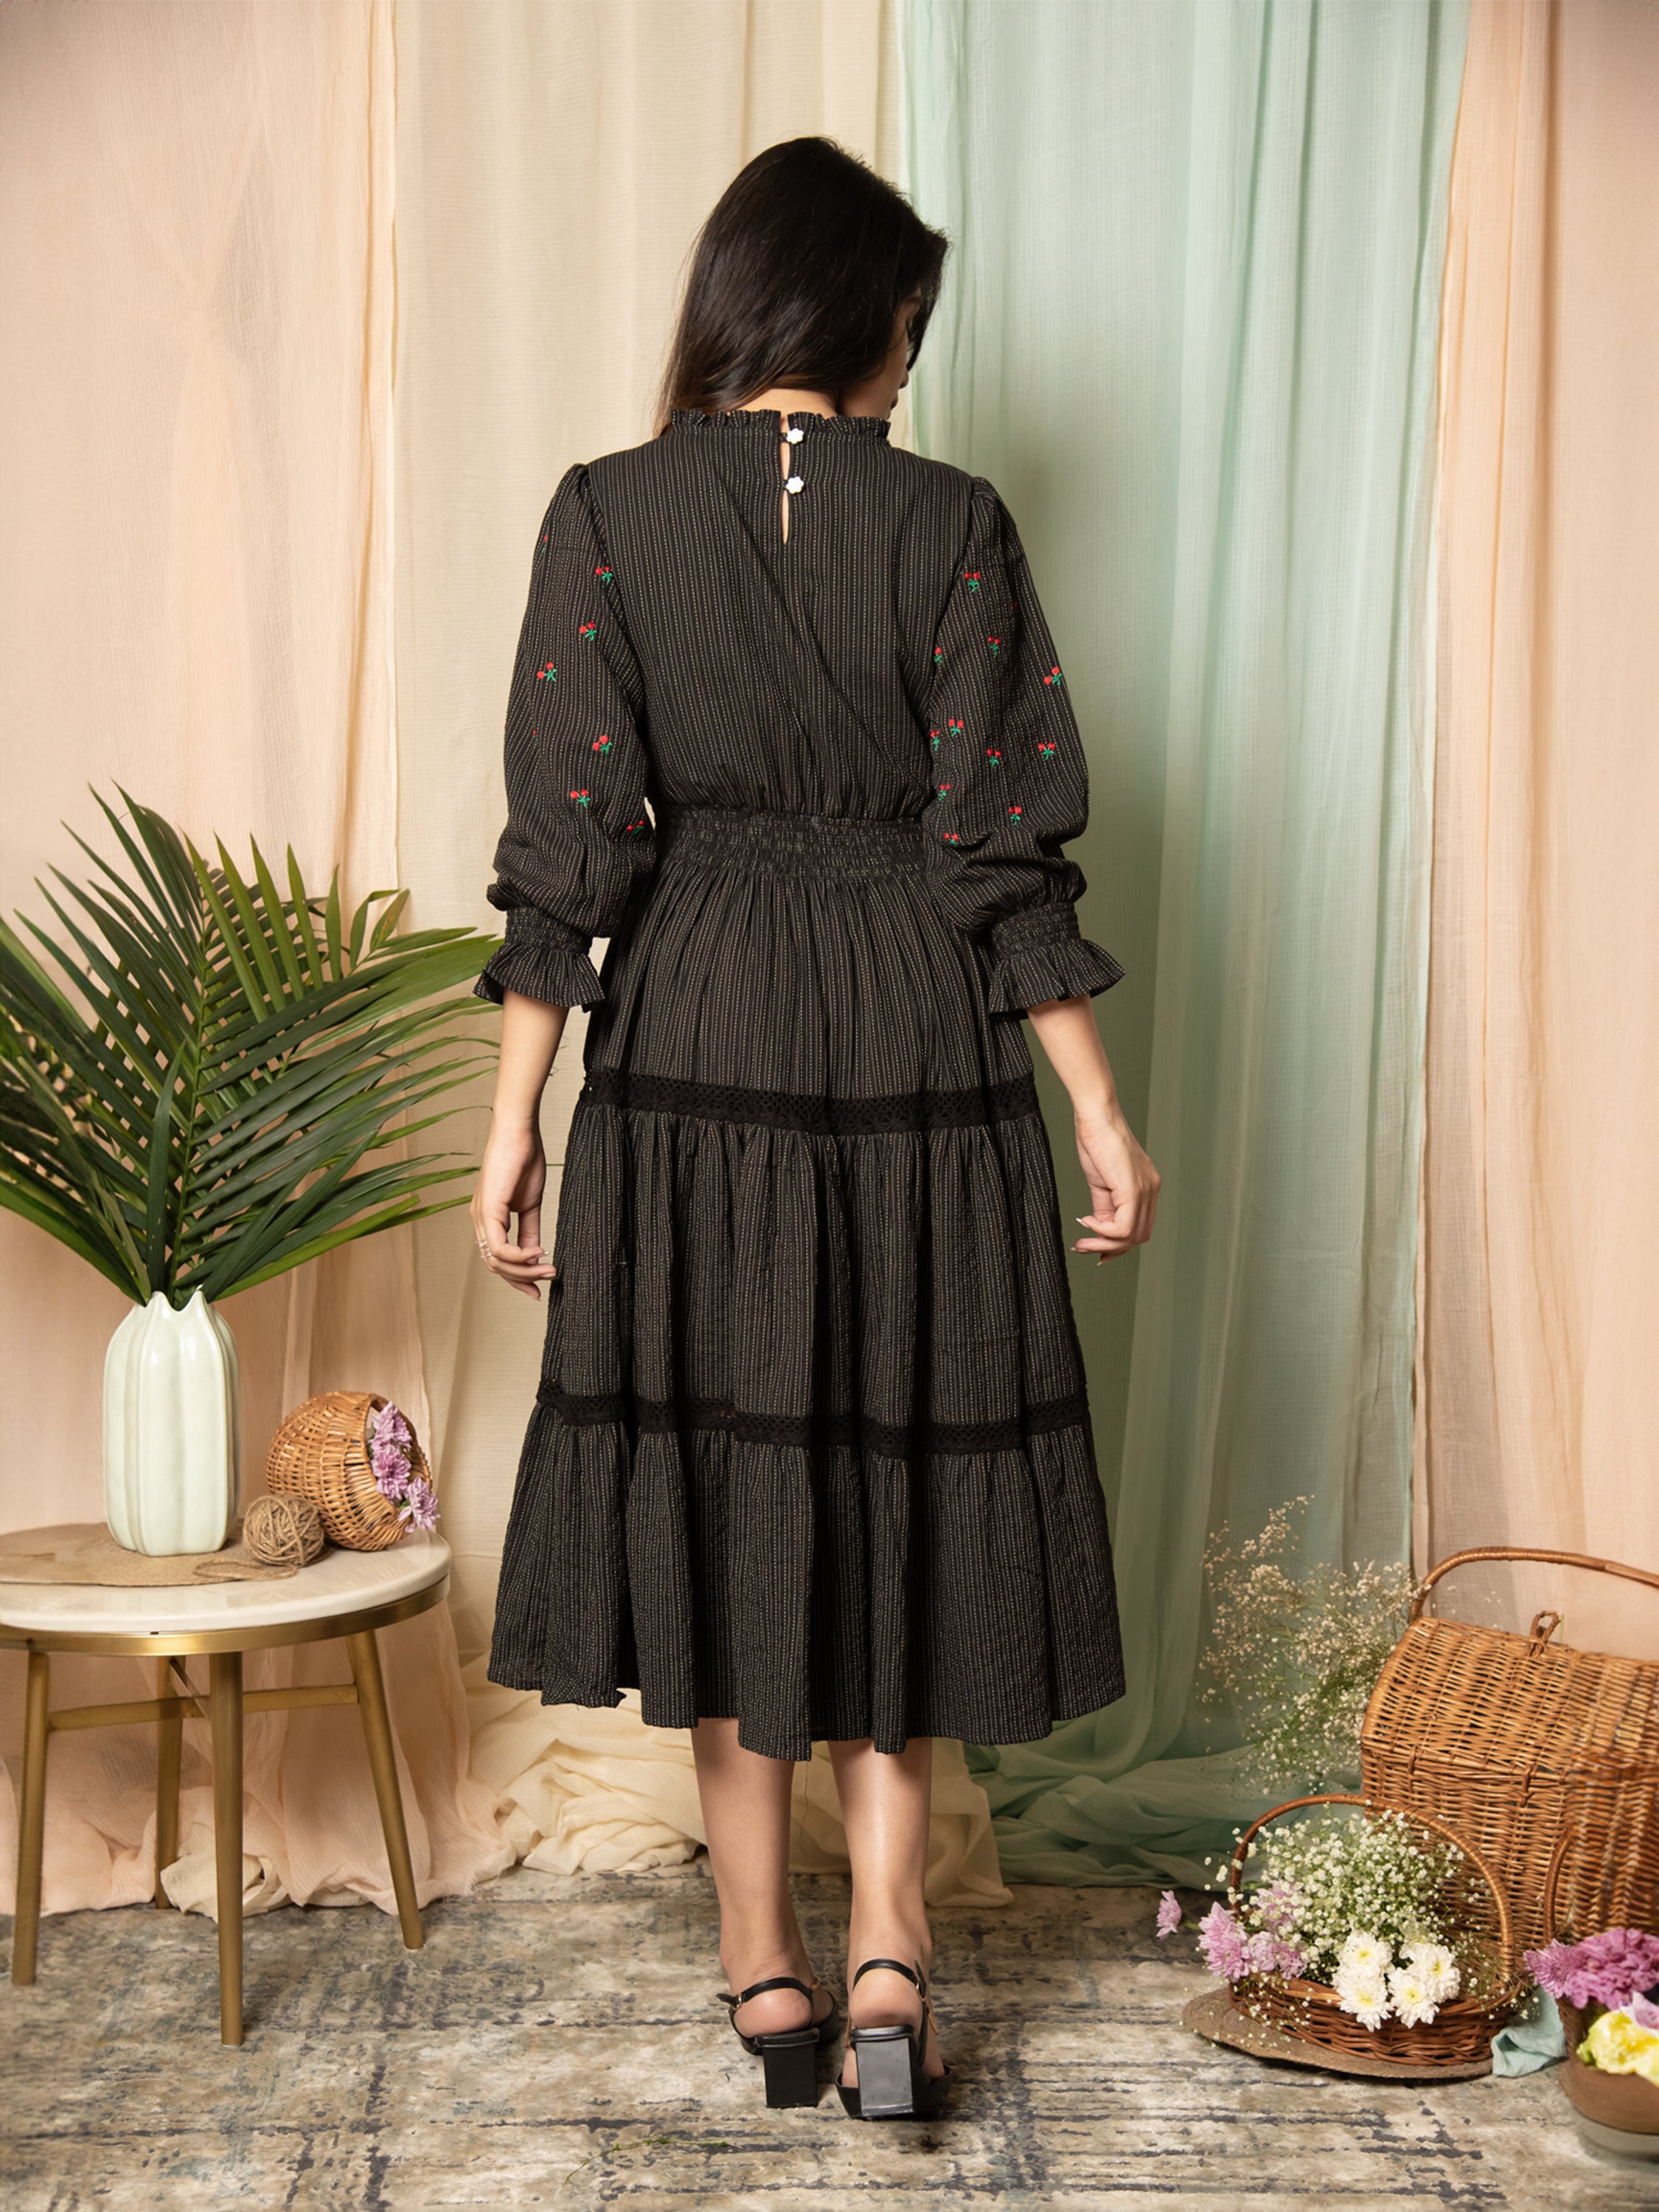 AAHELI RADIANT MEADOWS BLACK COTTON KANTHA TIERED DRESS